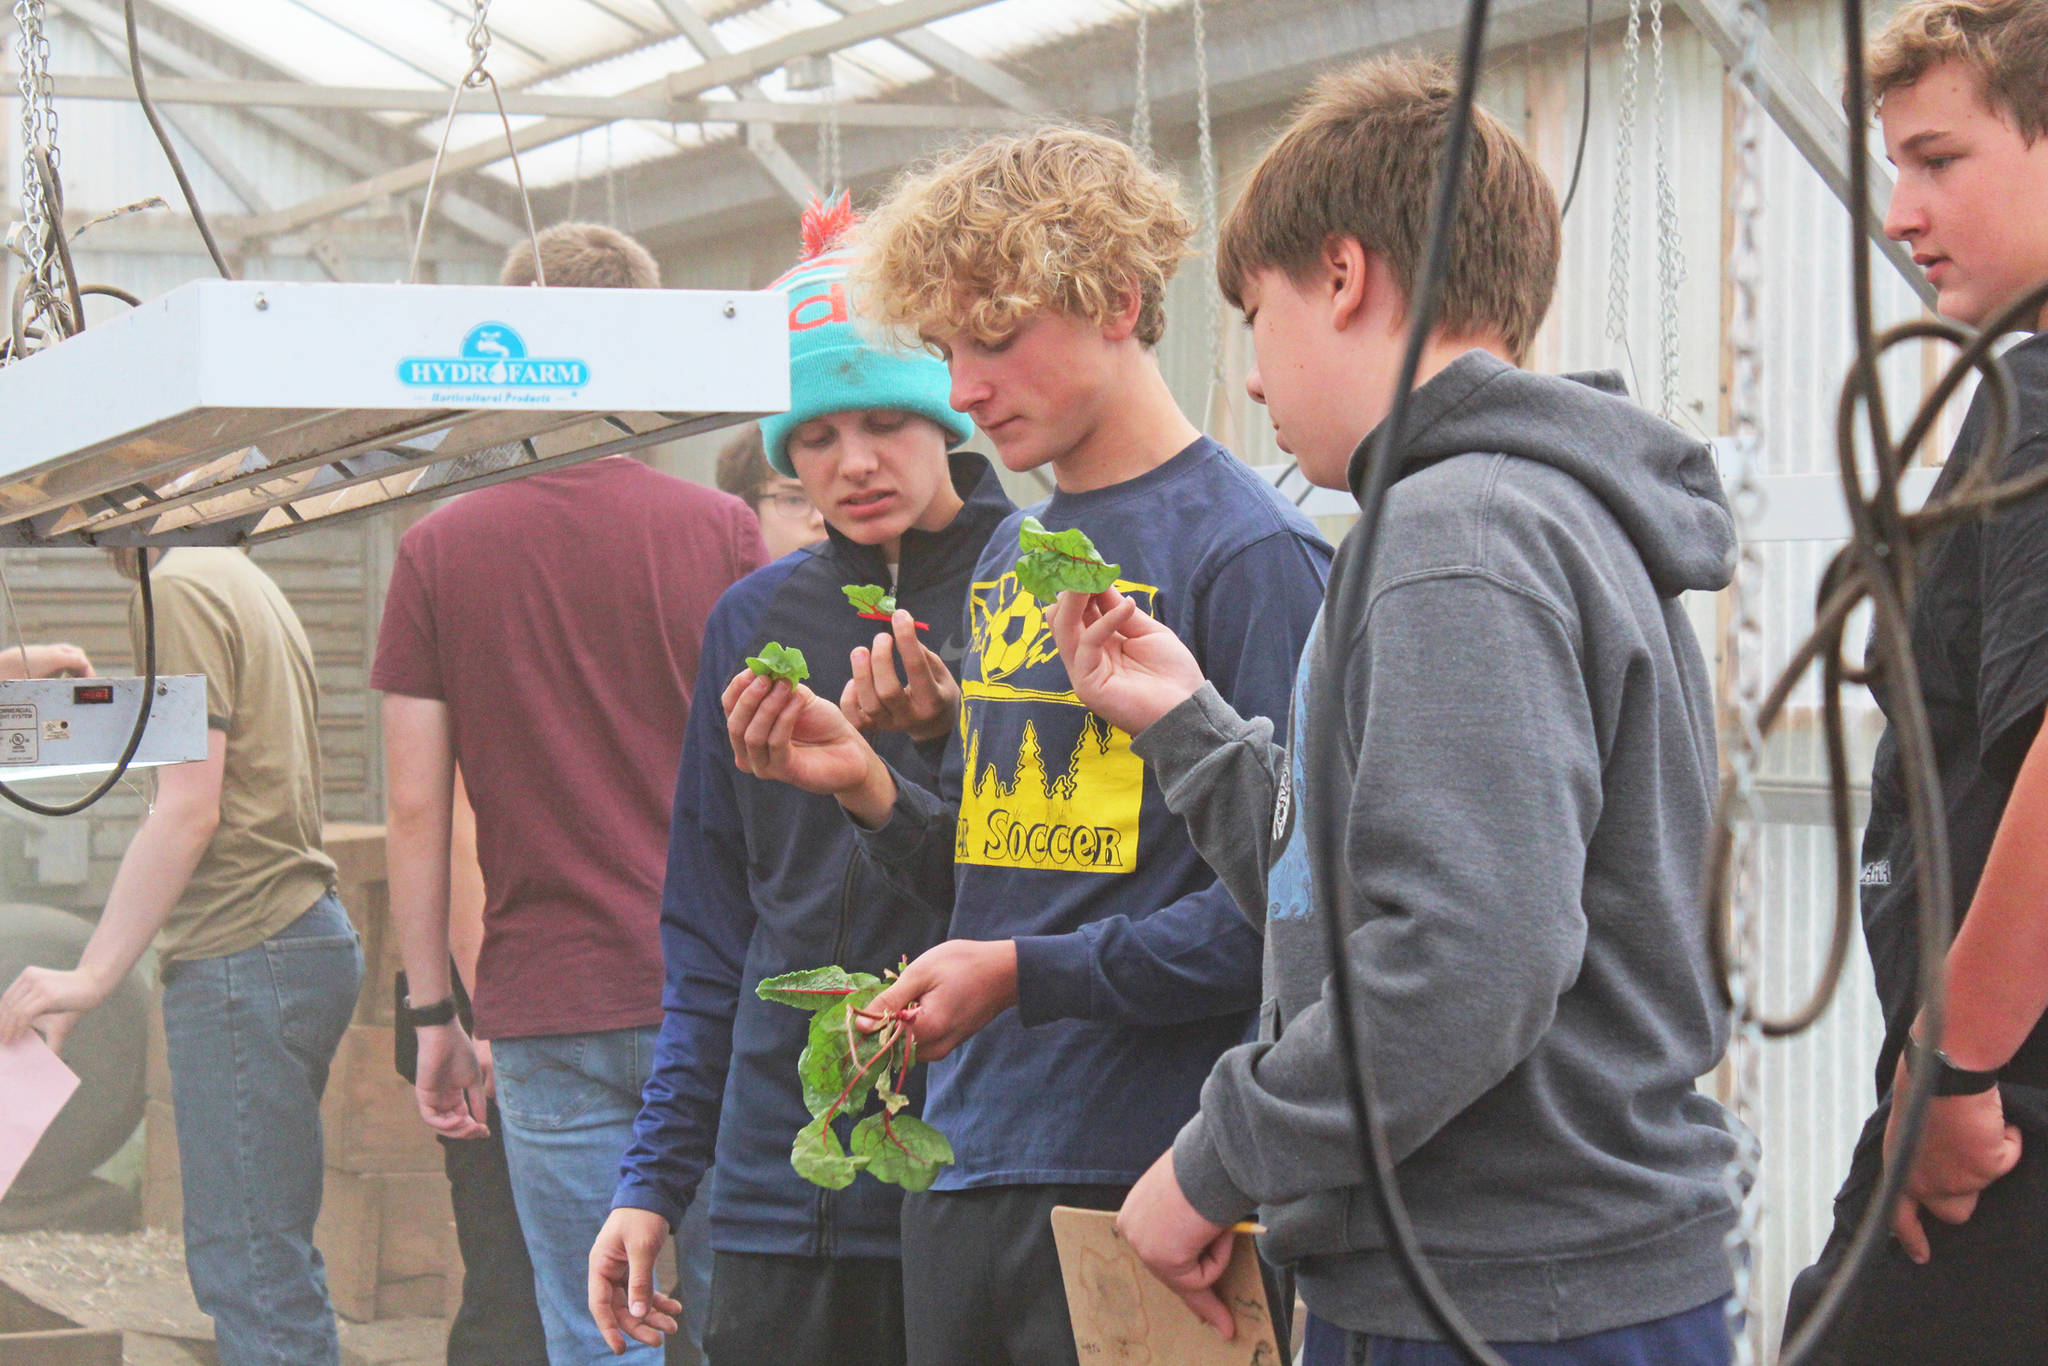 From left to right: Ty Etzwiler, Parker Lowney Casper Von try some chard left over in garden beds they were clearing Friday, Aug. 30, 2019 during their natural resources technology class at Homer High School in Homer, Alaska. (Photo by Megan Pacer/Homer News)